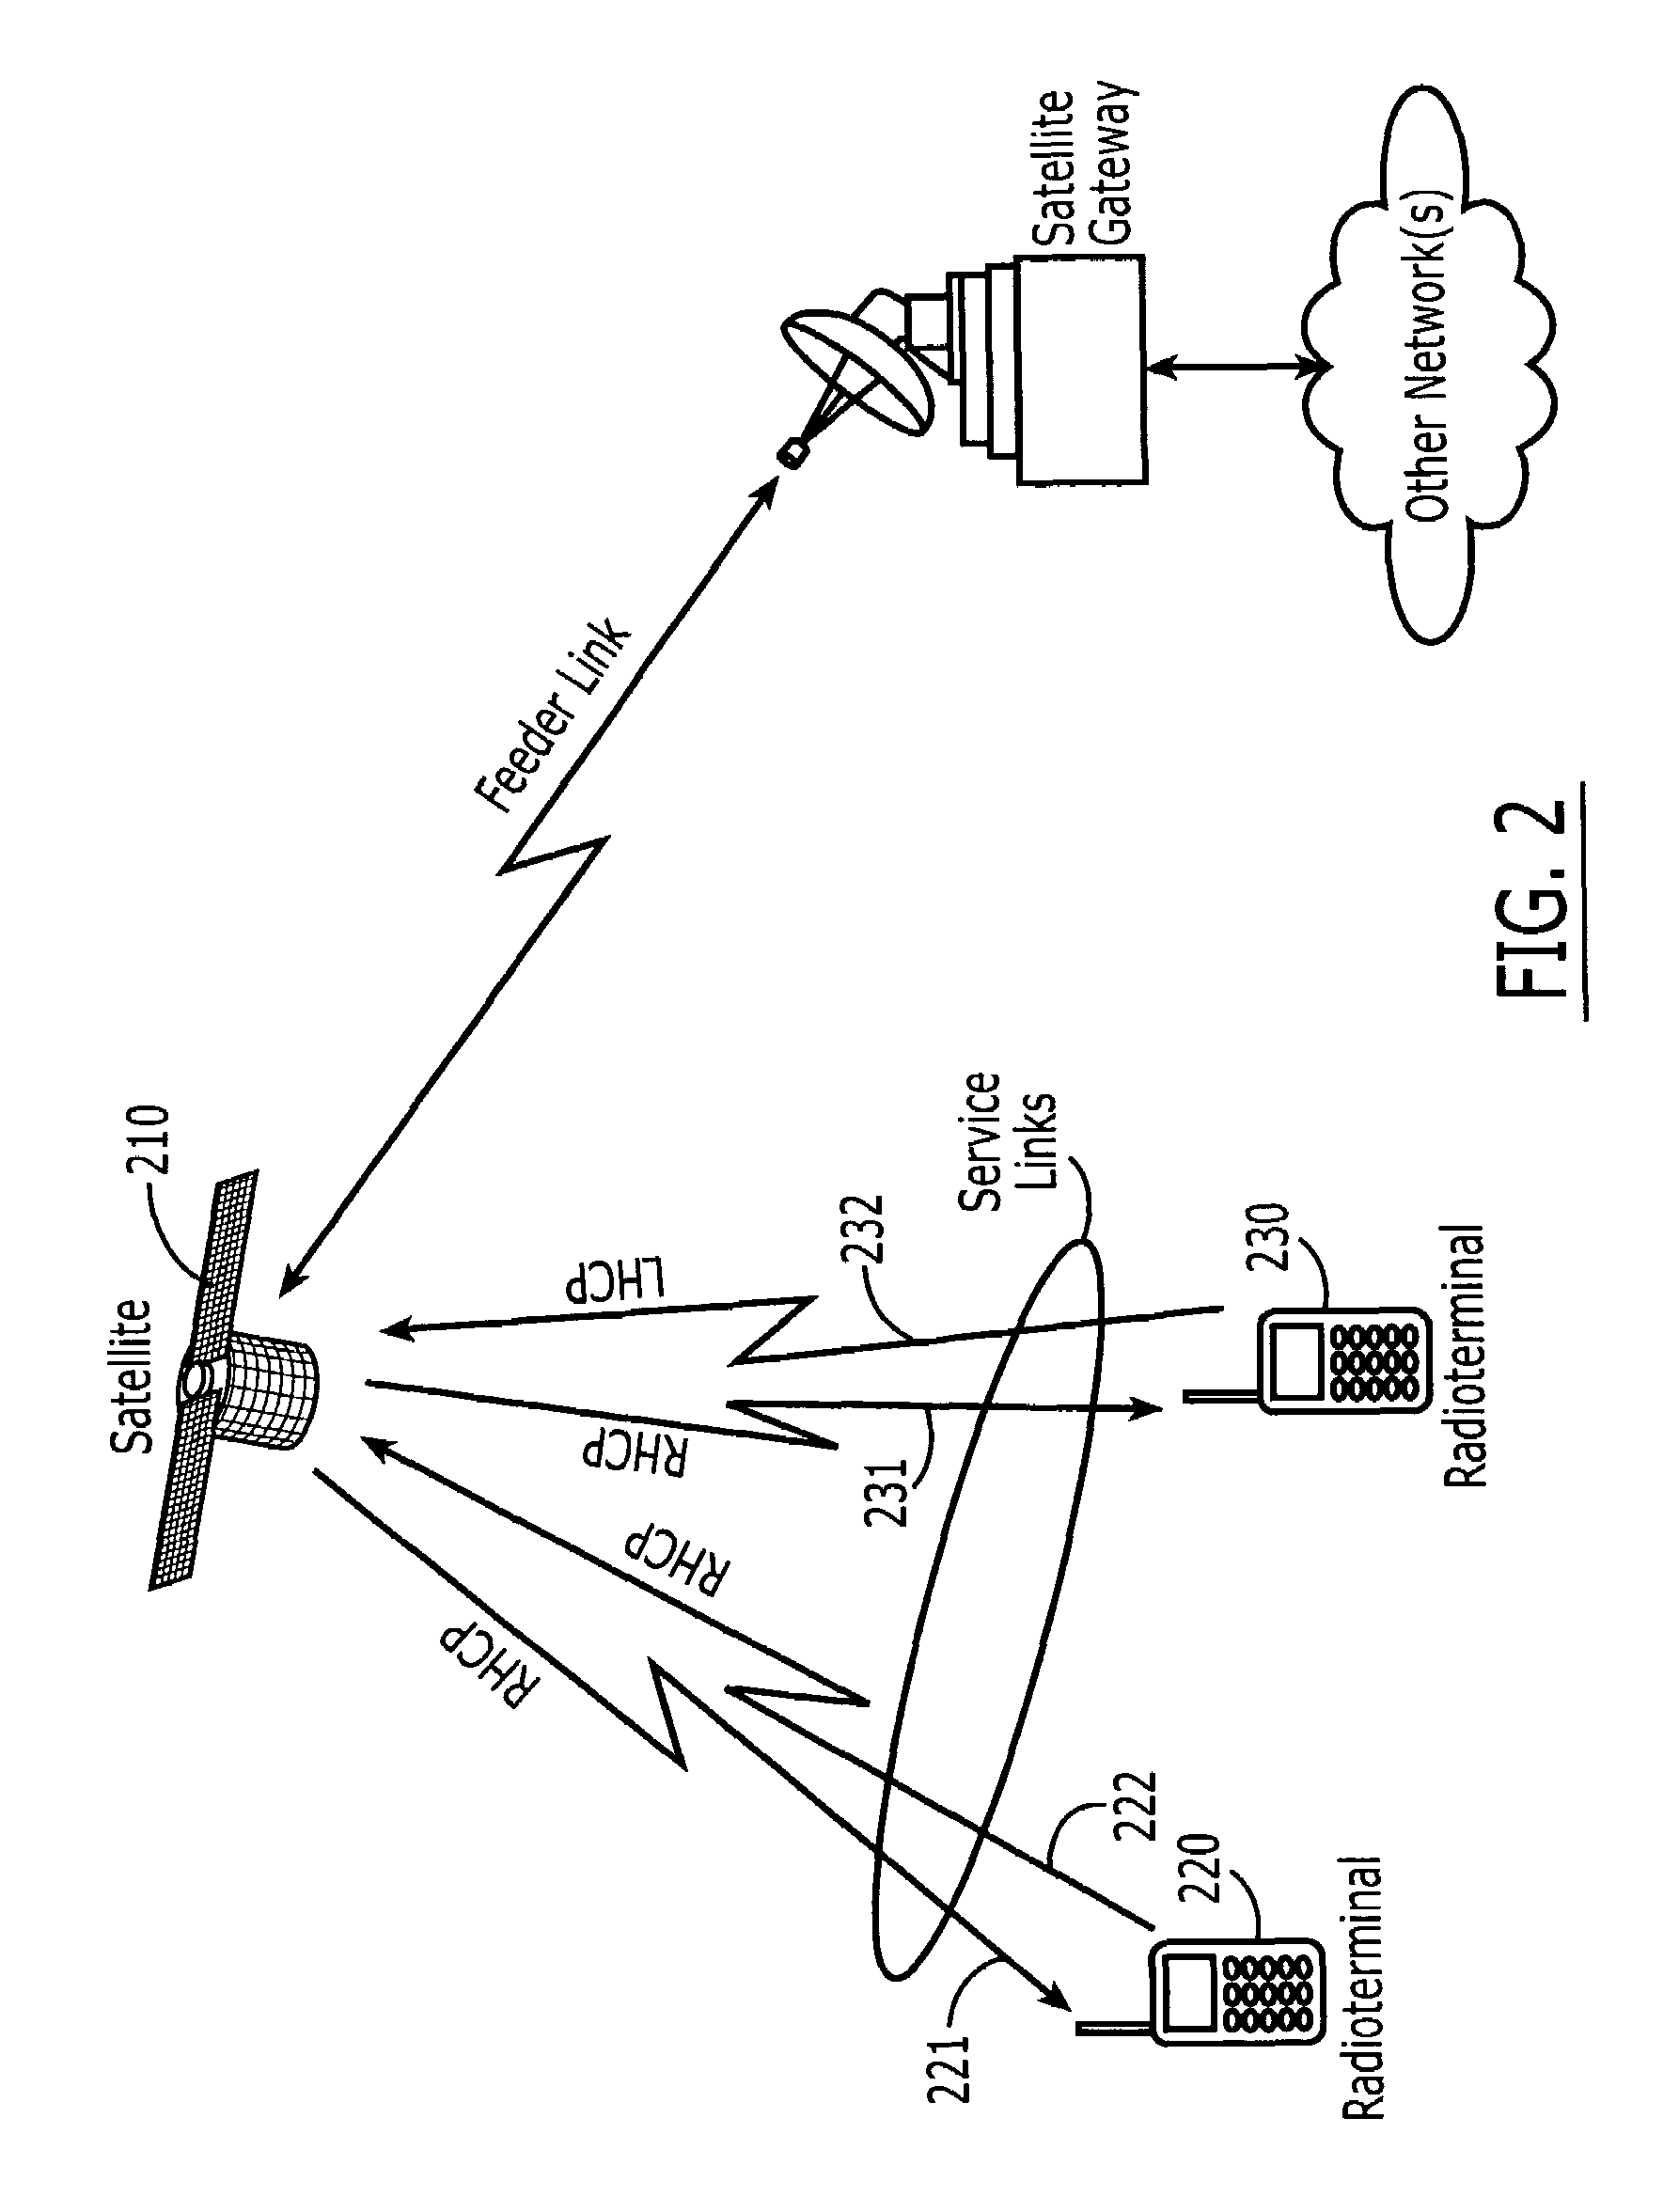 Satellite communications systems and methods using diverse polarizations